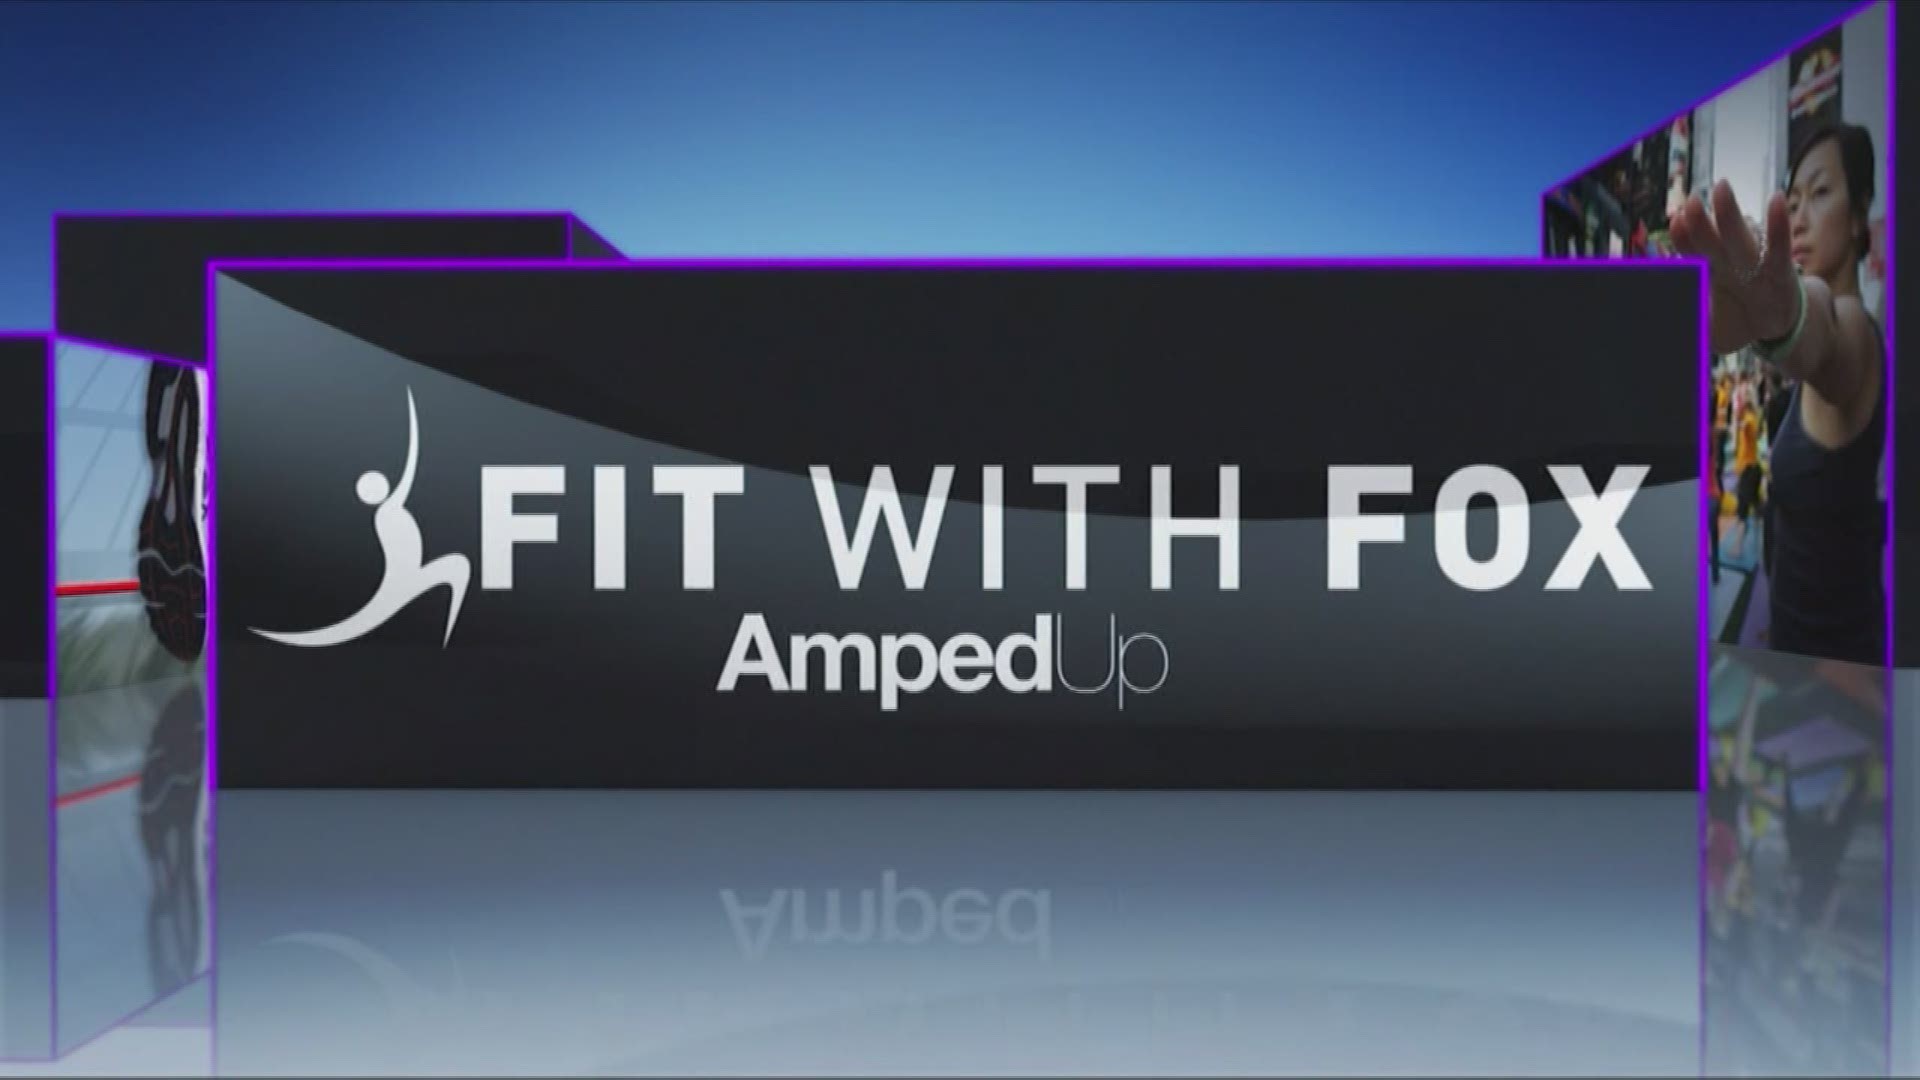 It's time for #FitWithFox #AmpedUp!